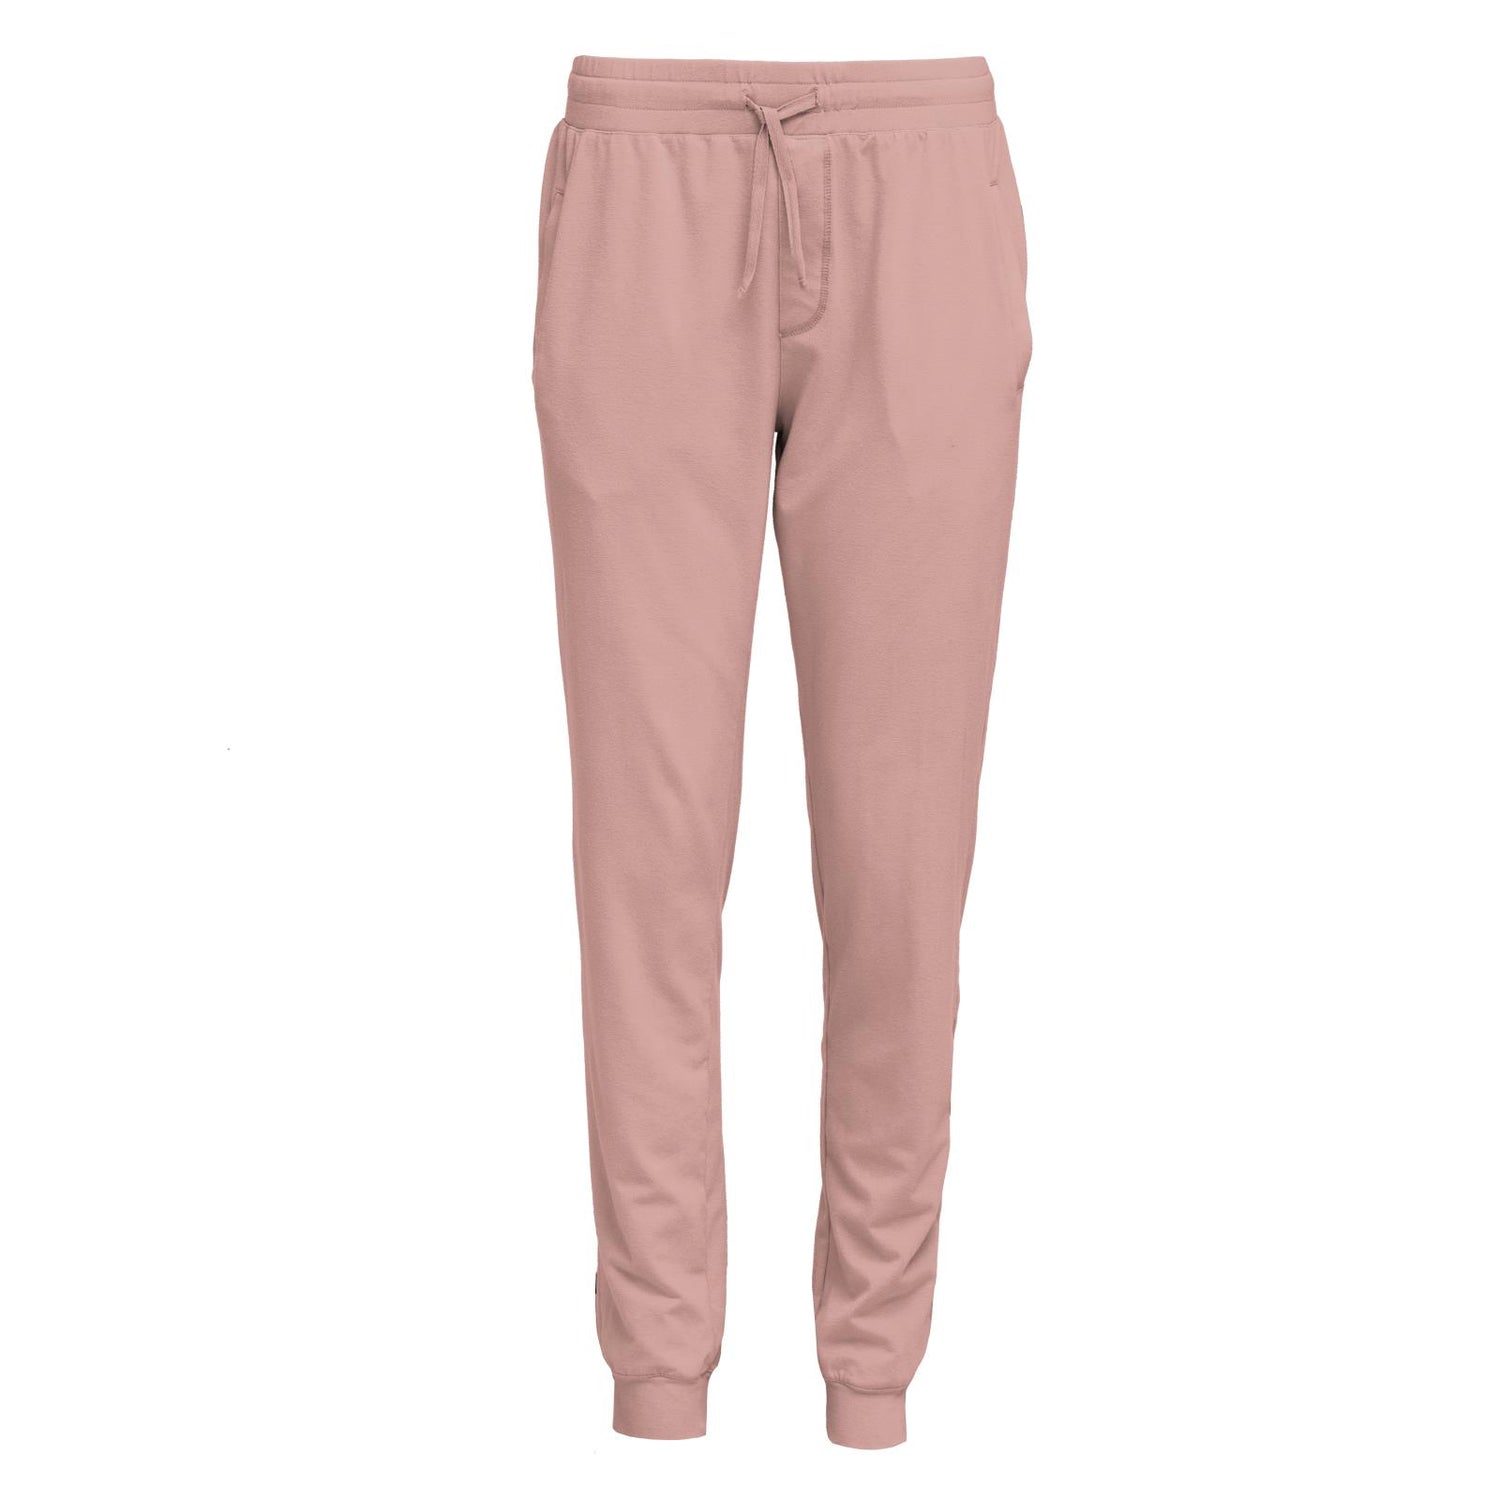 Women's Luxe Athletic Lounge Joggers in Blush